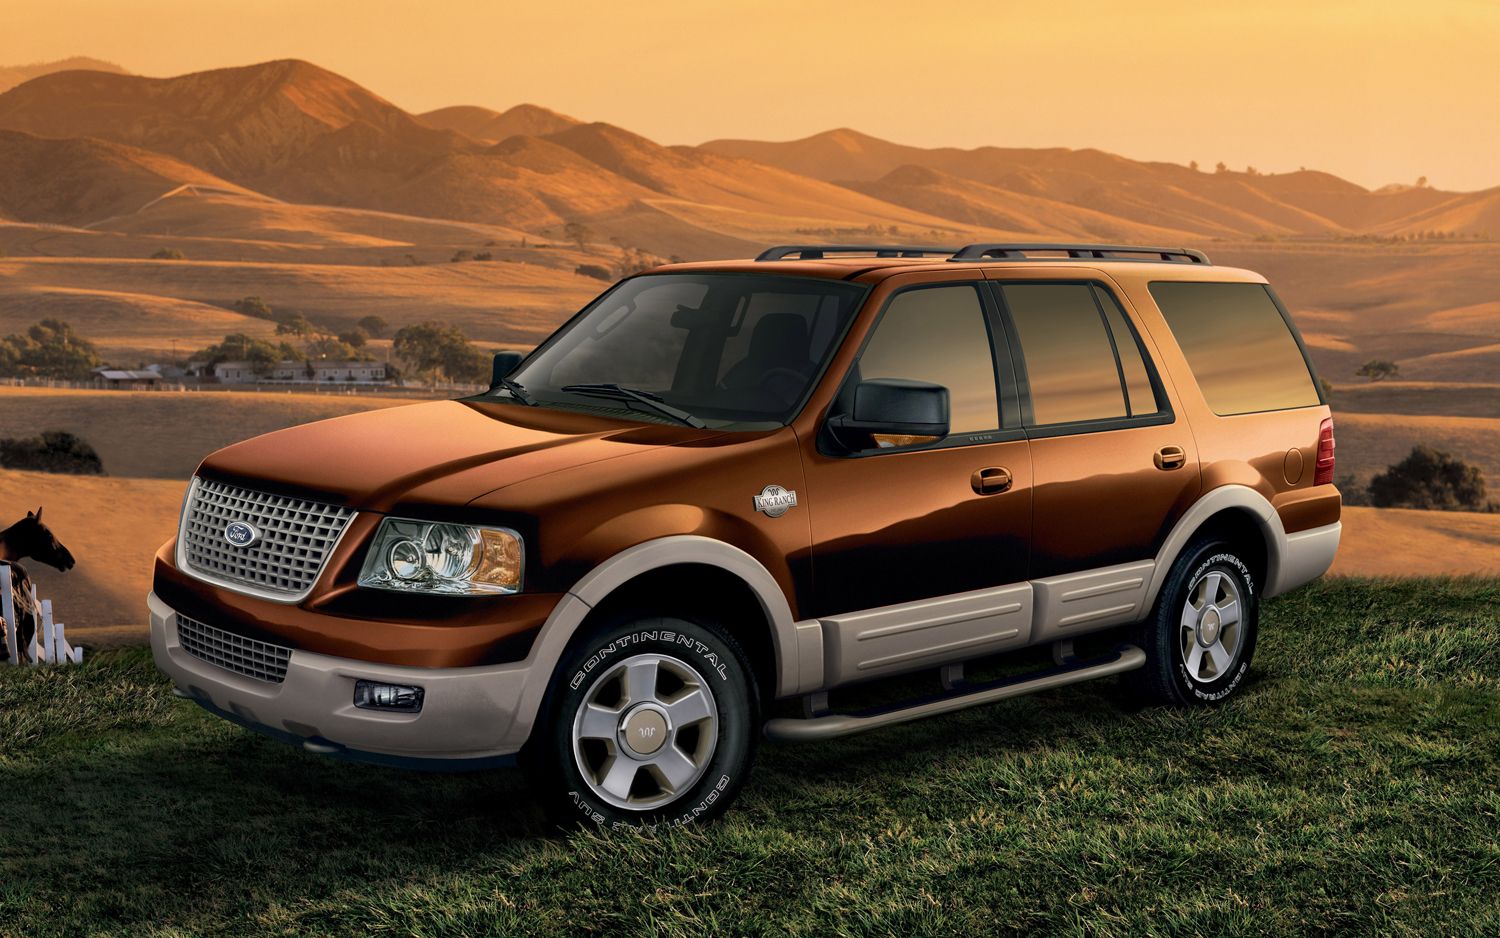 Ford Expedition, g-car, ремонт Ford Expedition, обслуживание Ford Expedition, сервис Ford Expedition, форд экспедишн, ремонт форд экспедишн, сервис форд экспедишн, тюнинг форд экспедишн